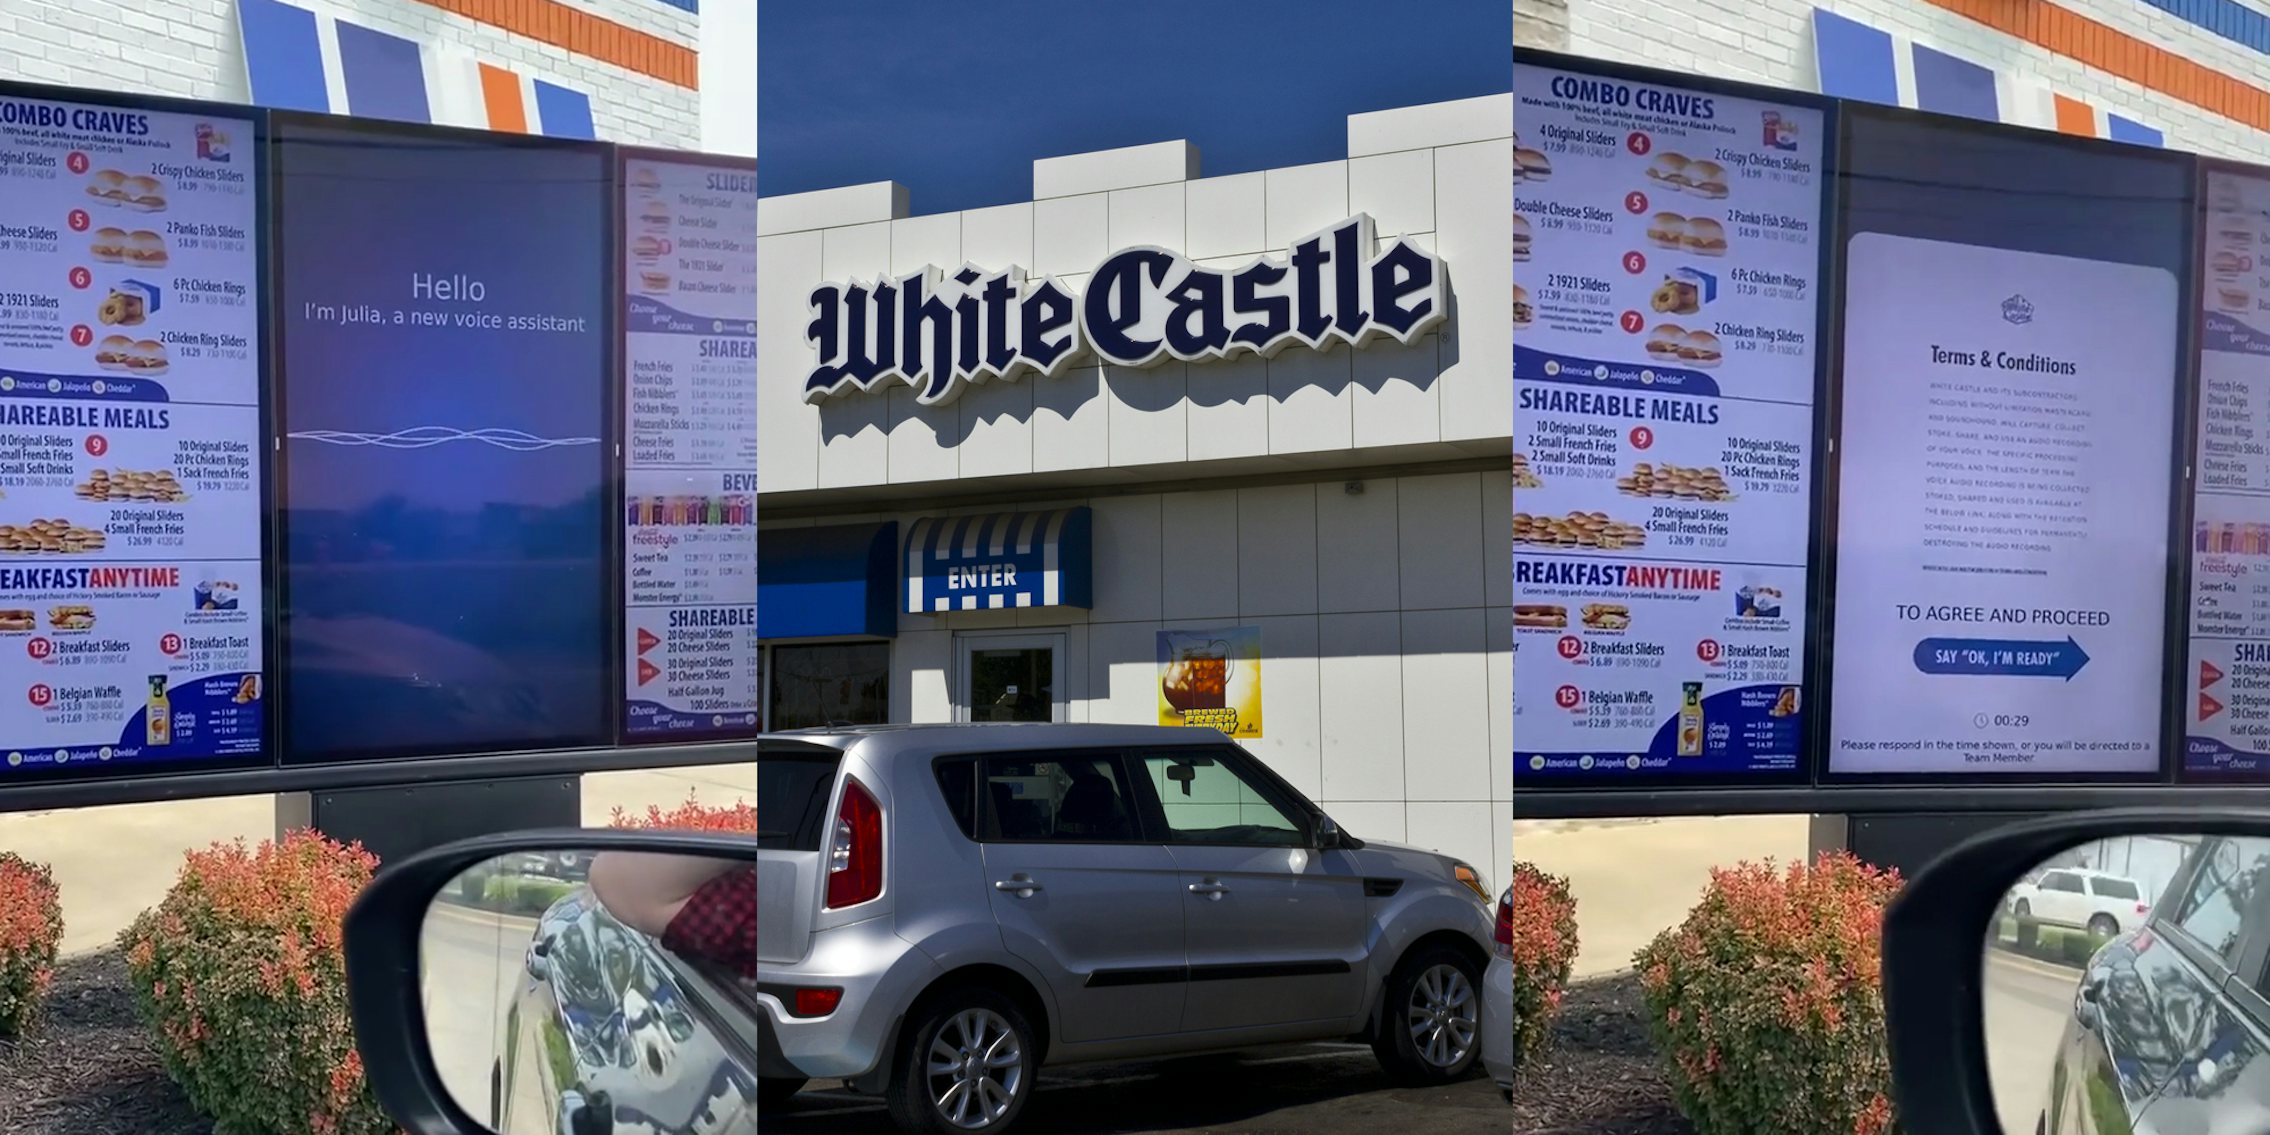 White Castle drive thru menu with voice assistant on screen (l) White Castle building with sign (c) White Castle drive thru menu with Terms & Conditions on screen (r)